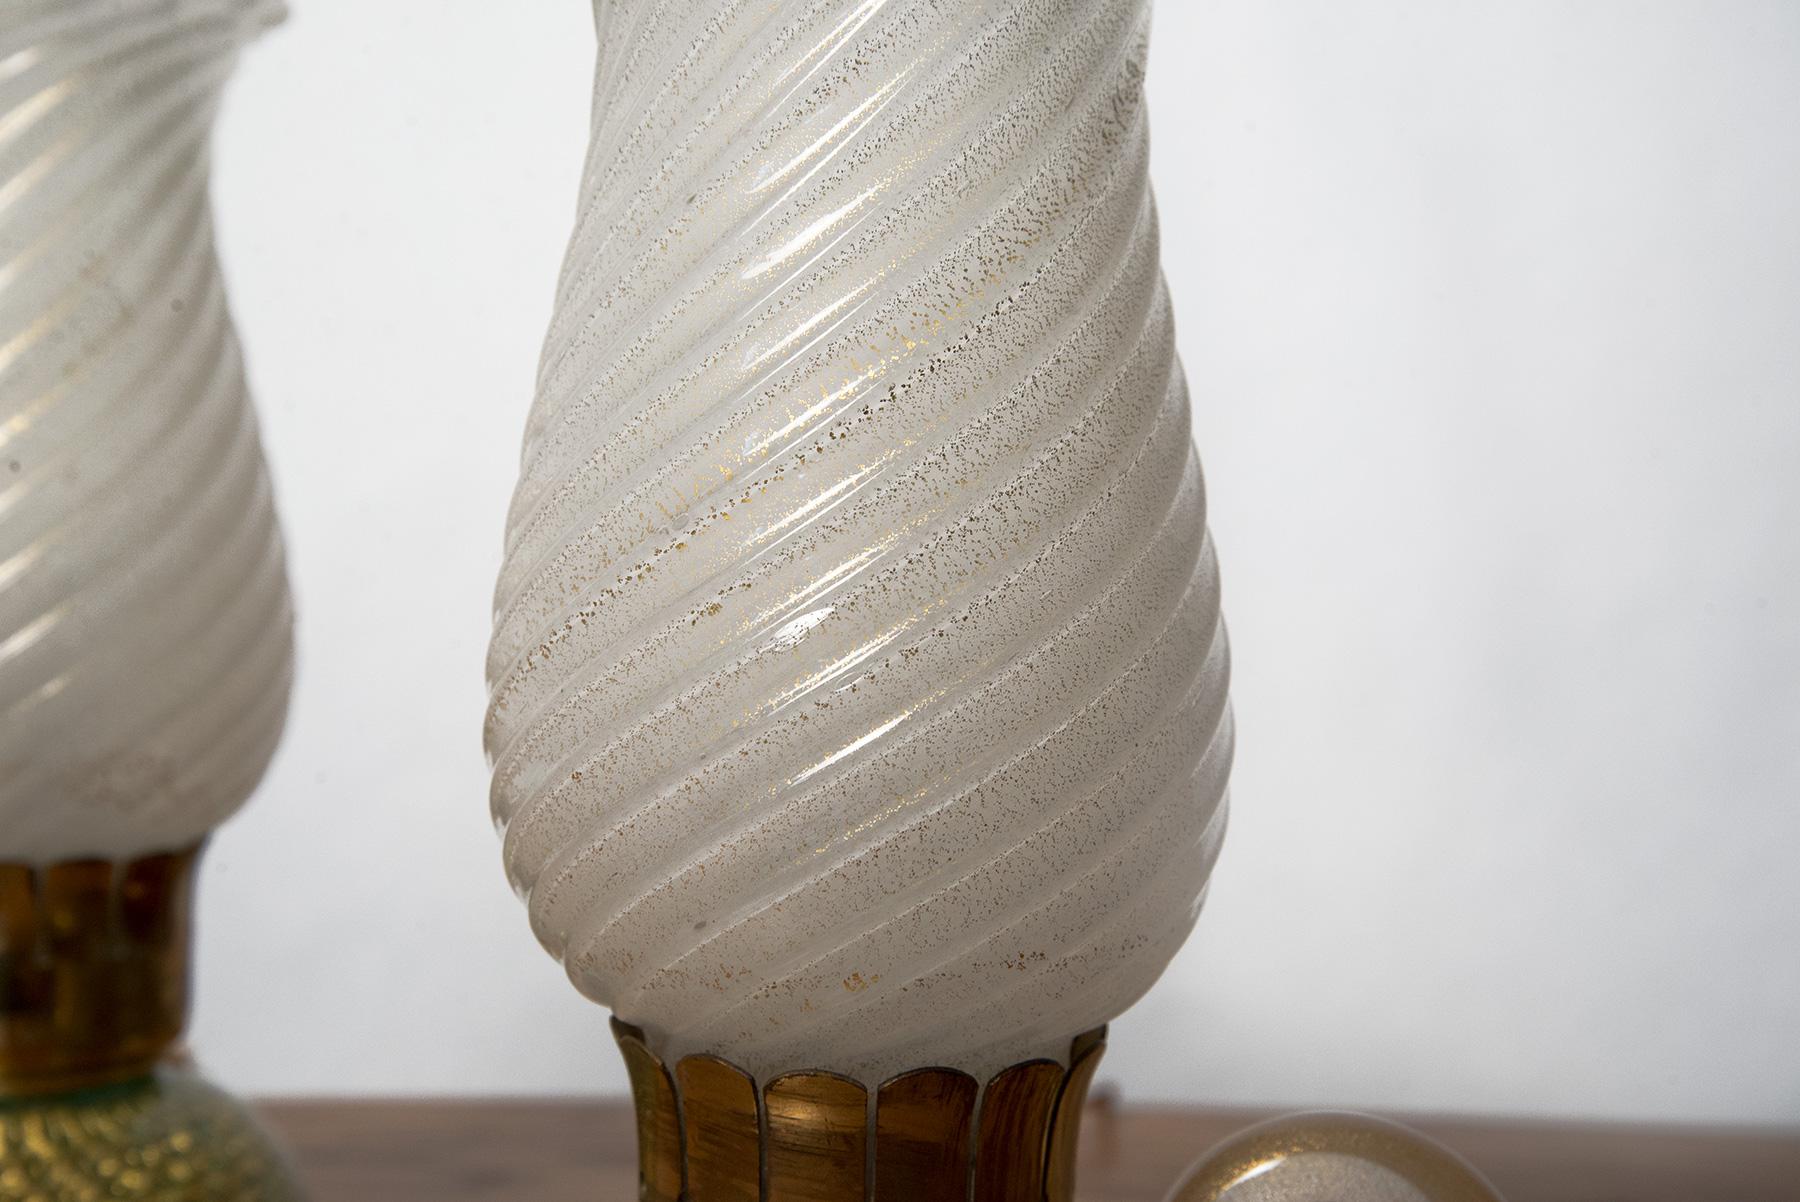 Pair of Murano glass table lamps manufactured by Seguso in the early 1950s. Gold 